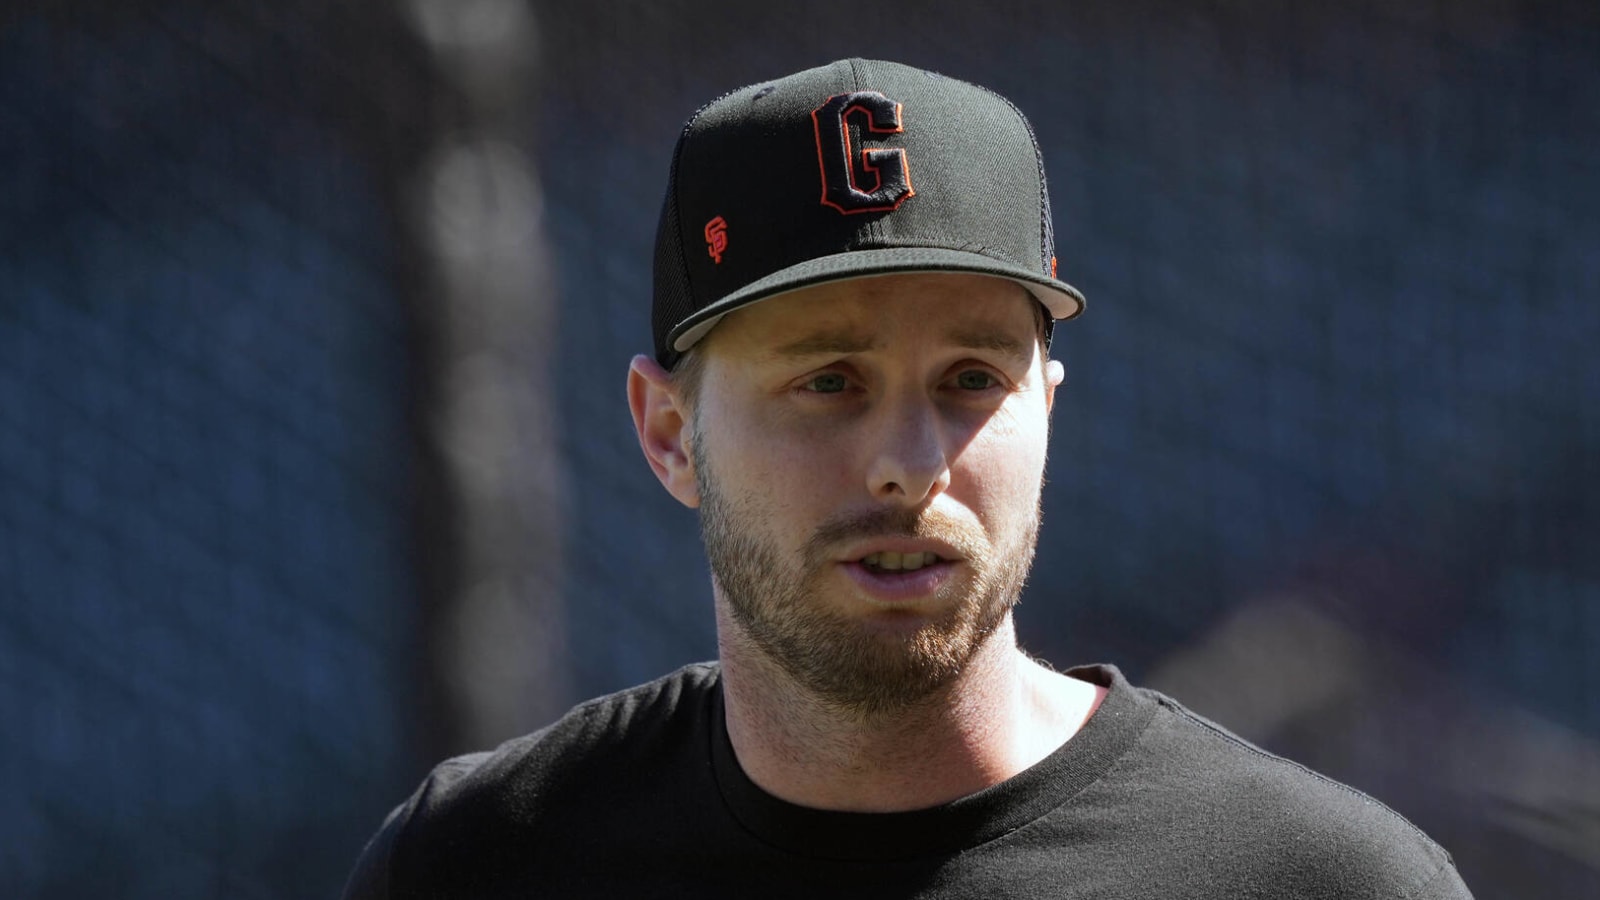 Giants outfielder undergoes right elbow surgery